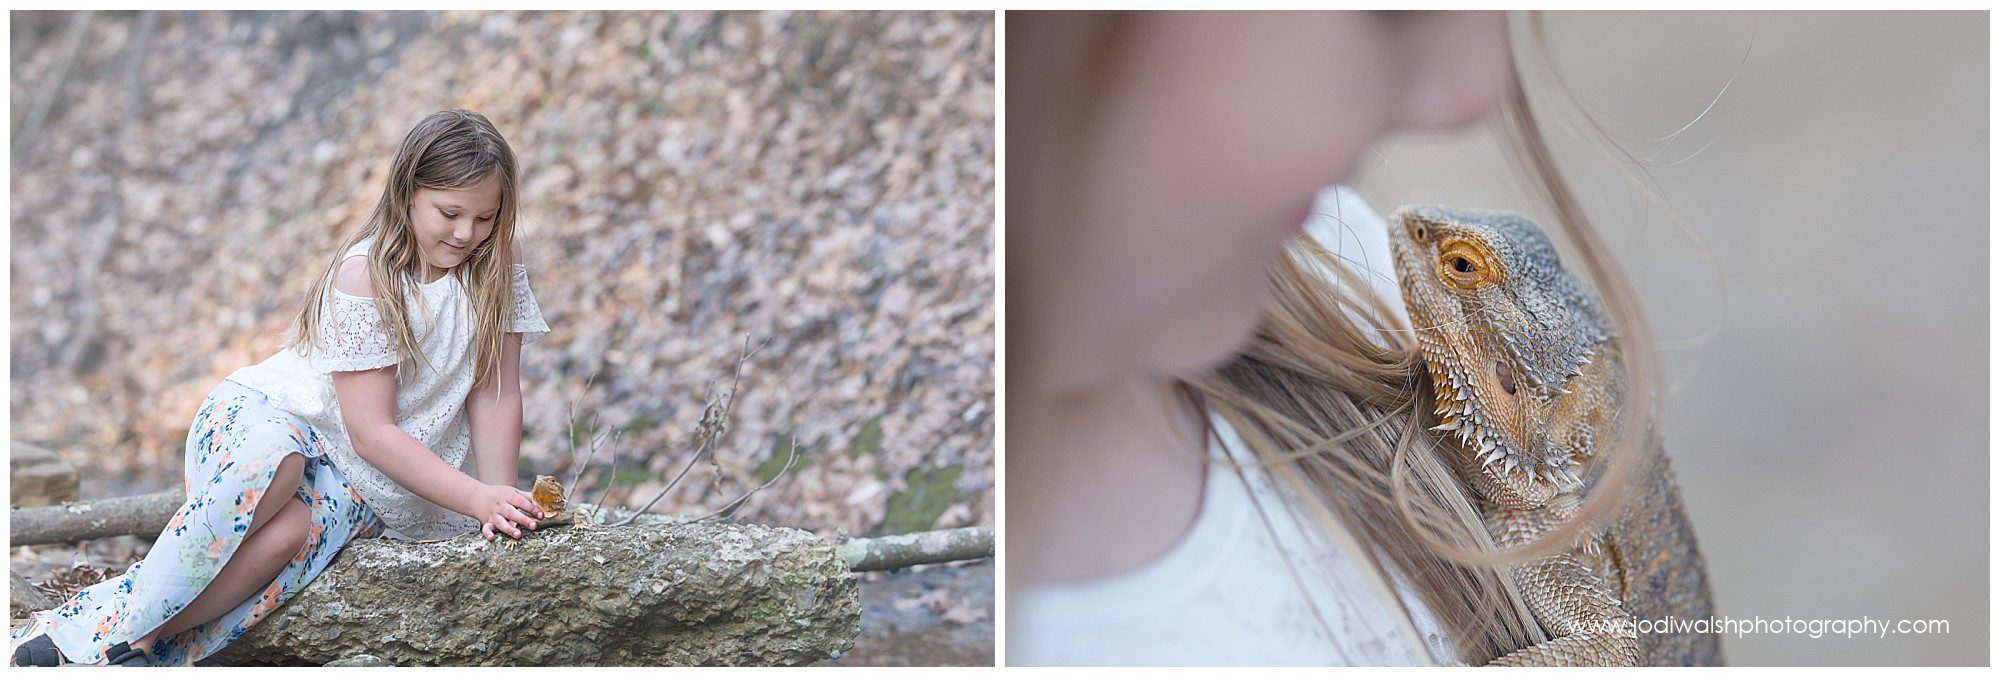 little girl with pet bearded dragon lizard sitting on rock in Pittsburgh area park